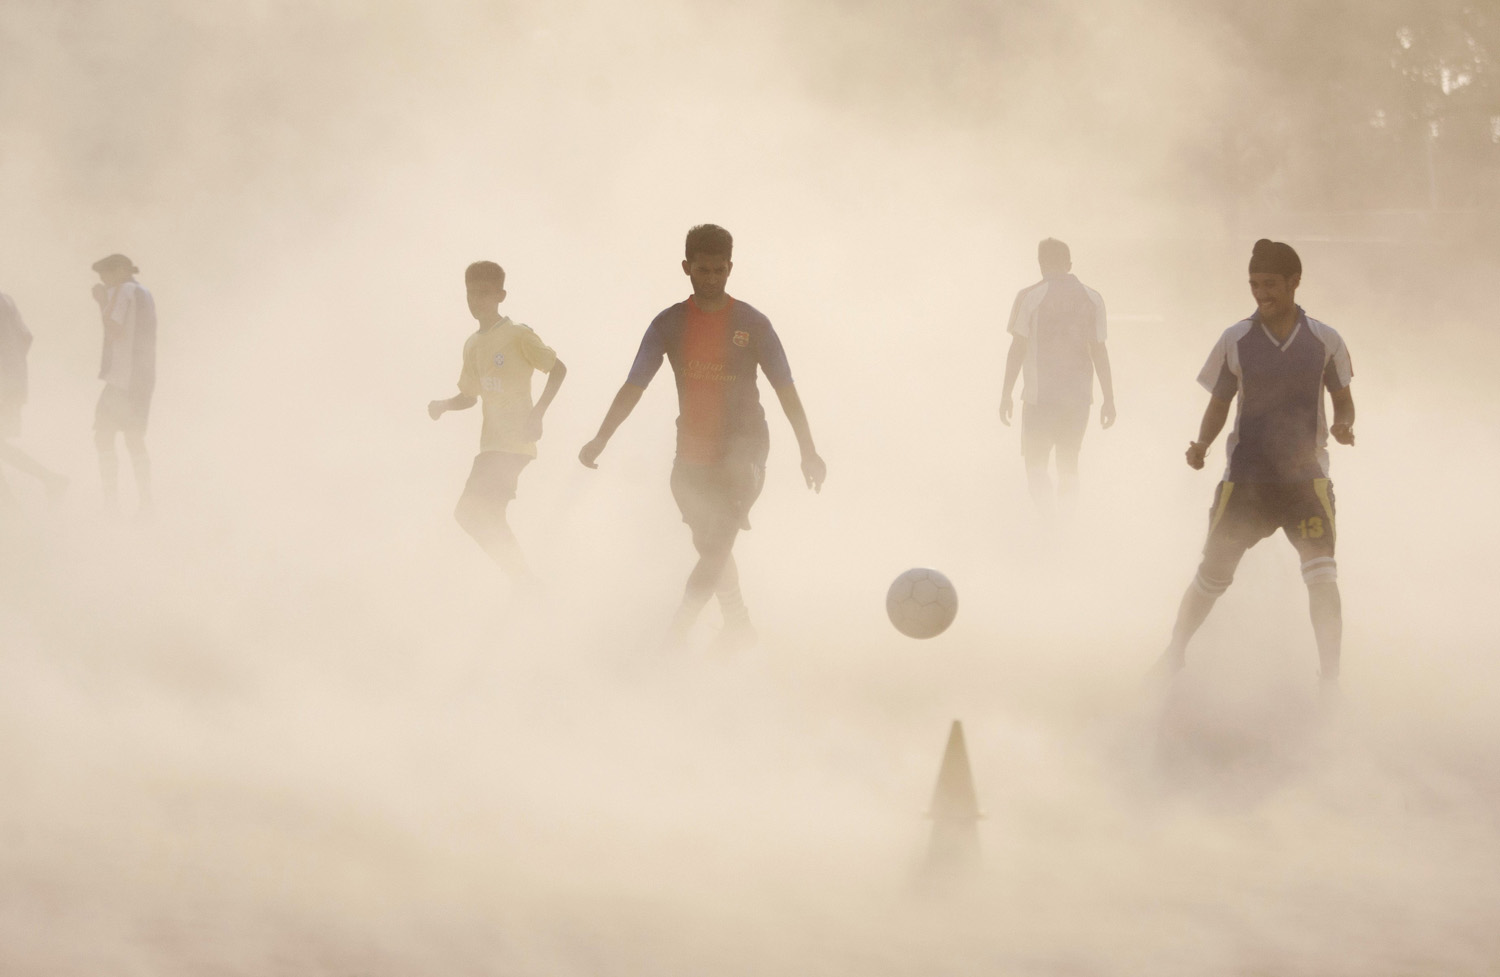 Aspiring young Indian soccer players continue with their practice during a dust storm in Jammu, India on June 11, 2014.